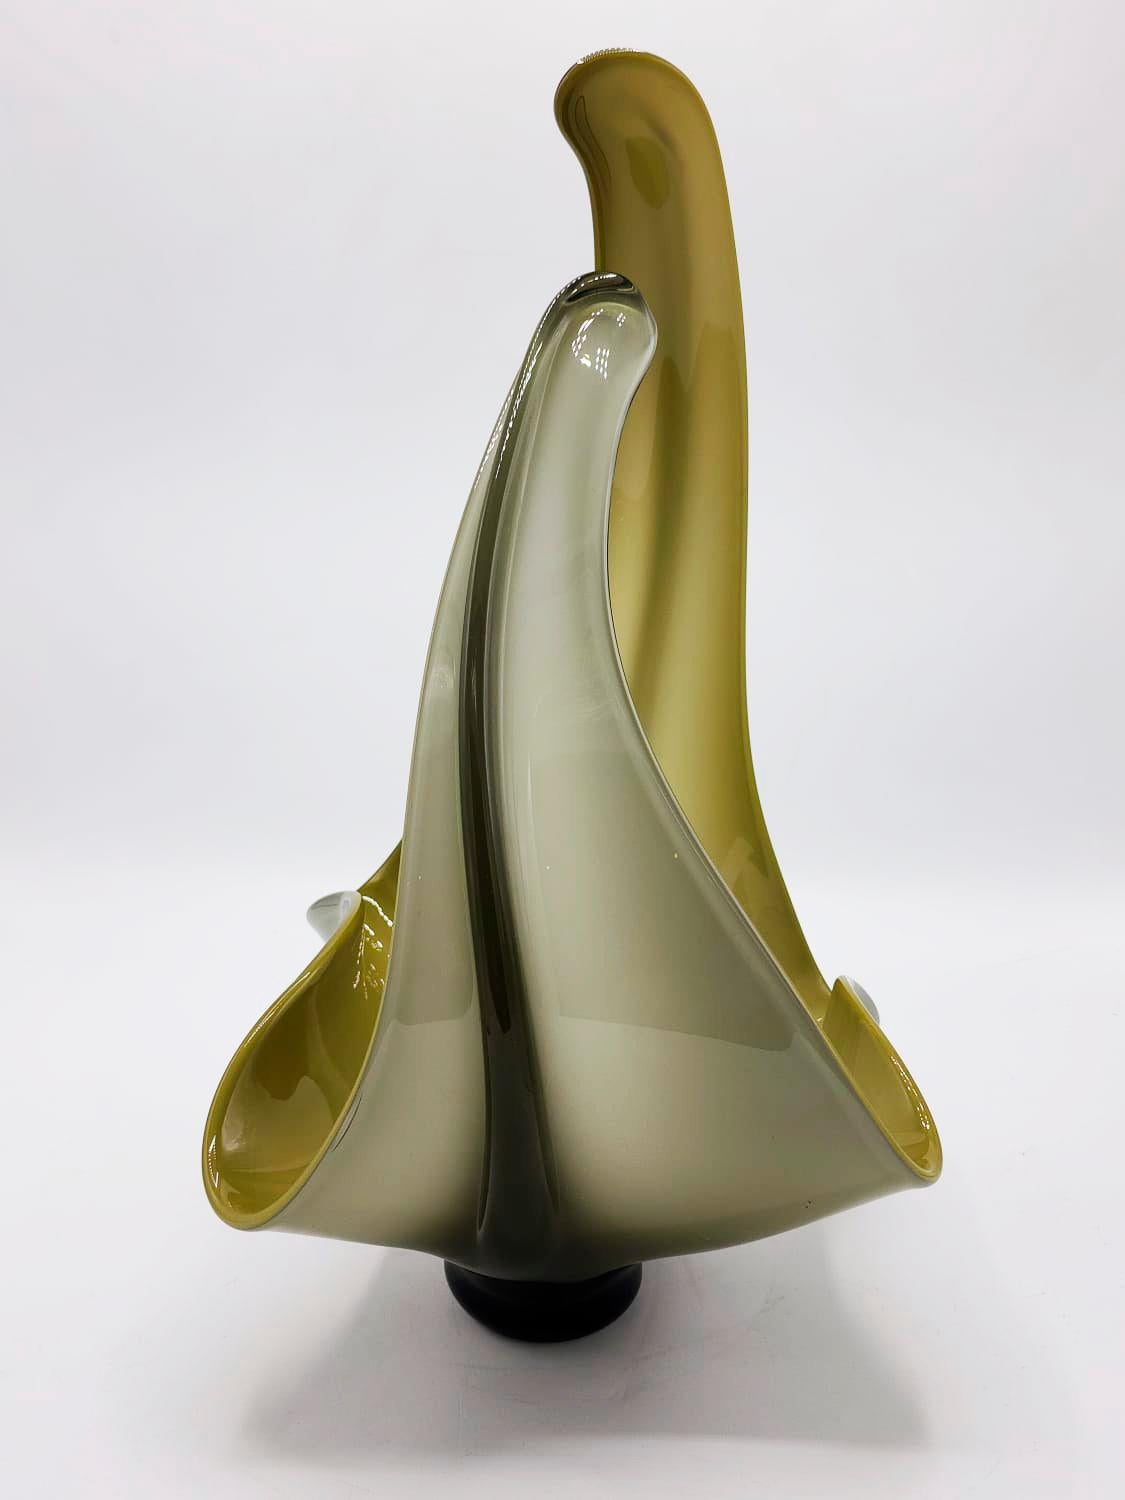 Hand-Crafted Italian modernist Murano glass vase with green tones for centerpiece For Sale